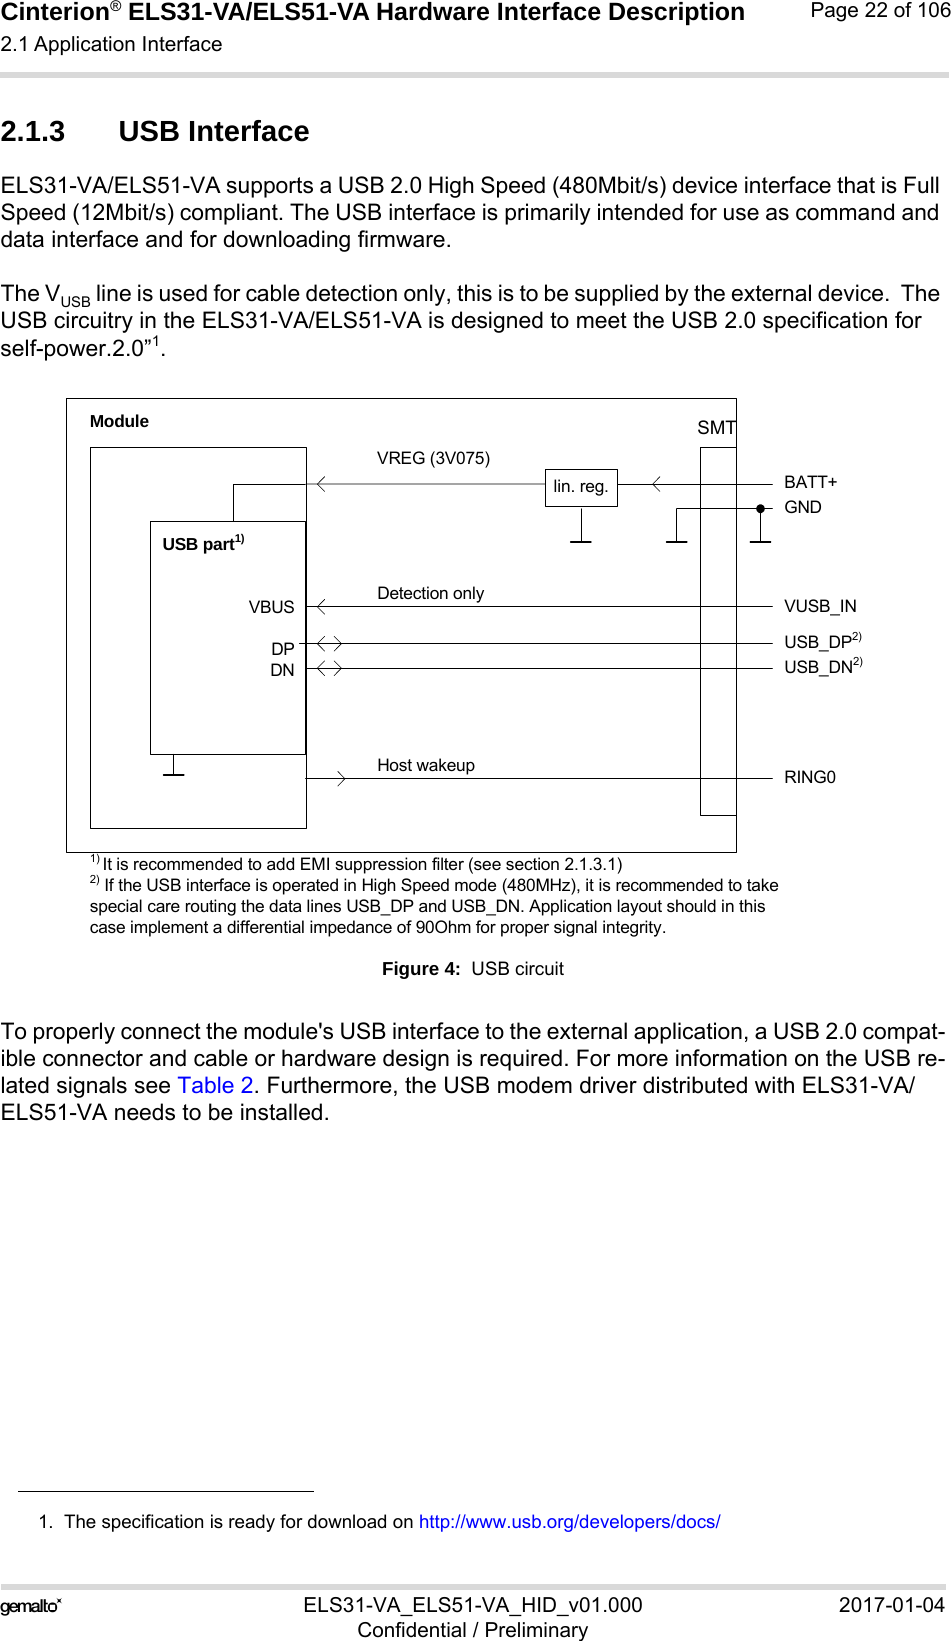 Cinterion® ELS31-VA/ELS51-VA Hardware Interface Description2.1 Application Interface56ELS31-VA_ELS51-VA_HID_v01.000 2017-01-04Confidential / PreliminaryPage 22 of 1062.1.3 USB InterfaceELS31-VA/ELS51-VA supports a USB 2.0 High Speed (480Mbit/s) device interface that is Full Speed (12Mbit/s) compliant. The USB interface is primarily intended for use as command and data interface and for downloading firmware. The VUSB line is used for cable detection only, this is to be supplied by the external device.  The USB circuitry in the ELS31-VA/ELS51-VA is designed to meet the USB 2.0 specification for self-power.2.0”1.Figure 4:  USB circuitTo properly connect the module&apos;s USB interface to the external application, a USB 2.0 compat-ible connector and cable or hardware design is required. For more information on the USB re-lated signals see Table 2. Furthermore, the USB modem driver distributed with ELS31-VA/ELS51-VA needs to be installed.1.  The specification is ready for download on http://www.usb.org/developers/docs/VBUSDPDNVREG (3V075)BATT+USB_DP2)lin. reg.GNDModuleDetection only VUSB_INUSB part1)RING0Host wakeup1) It is recommended to add EMI suppression filter (see section 2.1.3.1)USB_DN2)2) If the USB interface is operated in High Speed mode (480MHz), it is recommended to take special care routing the data lines USB_DP and USB_DN. Application layout should in this case implement a differential impedance of 90Ohm for proper signal integrity.SMT